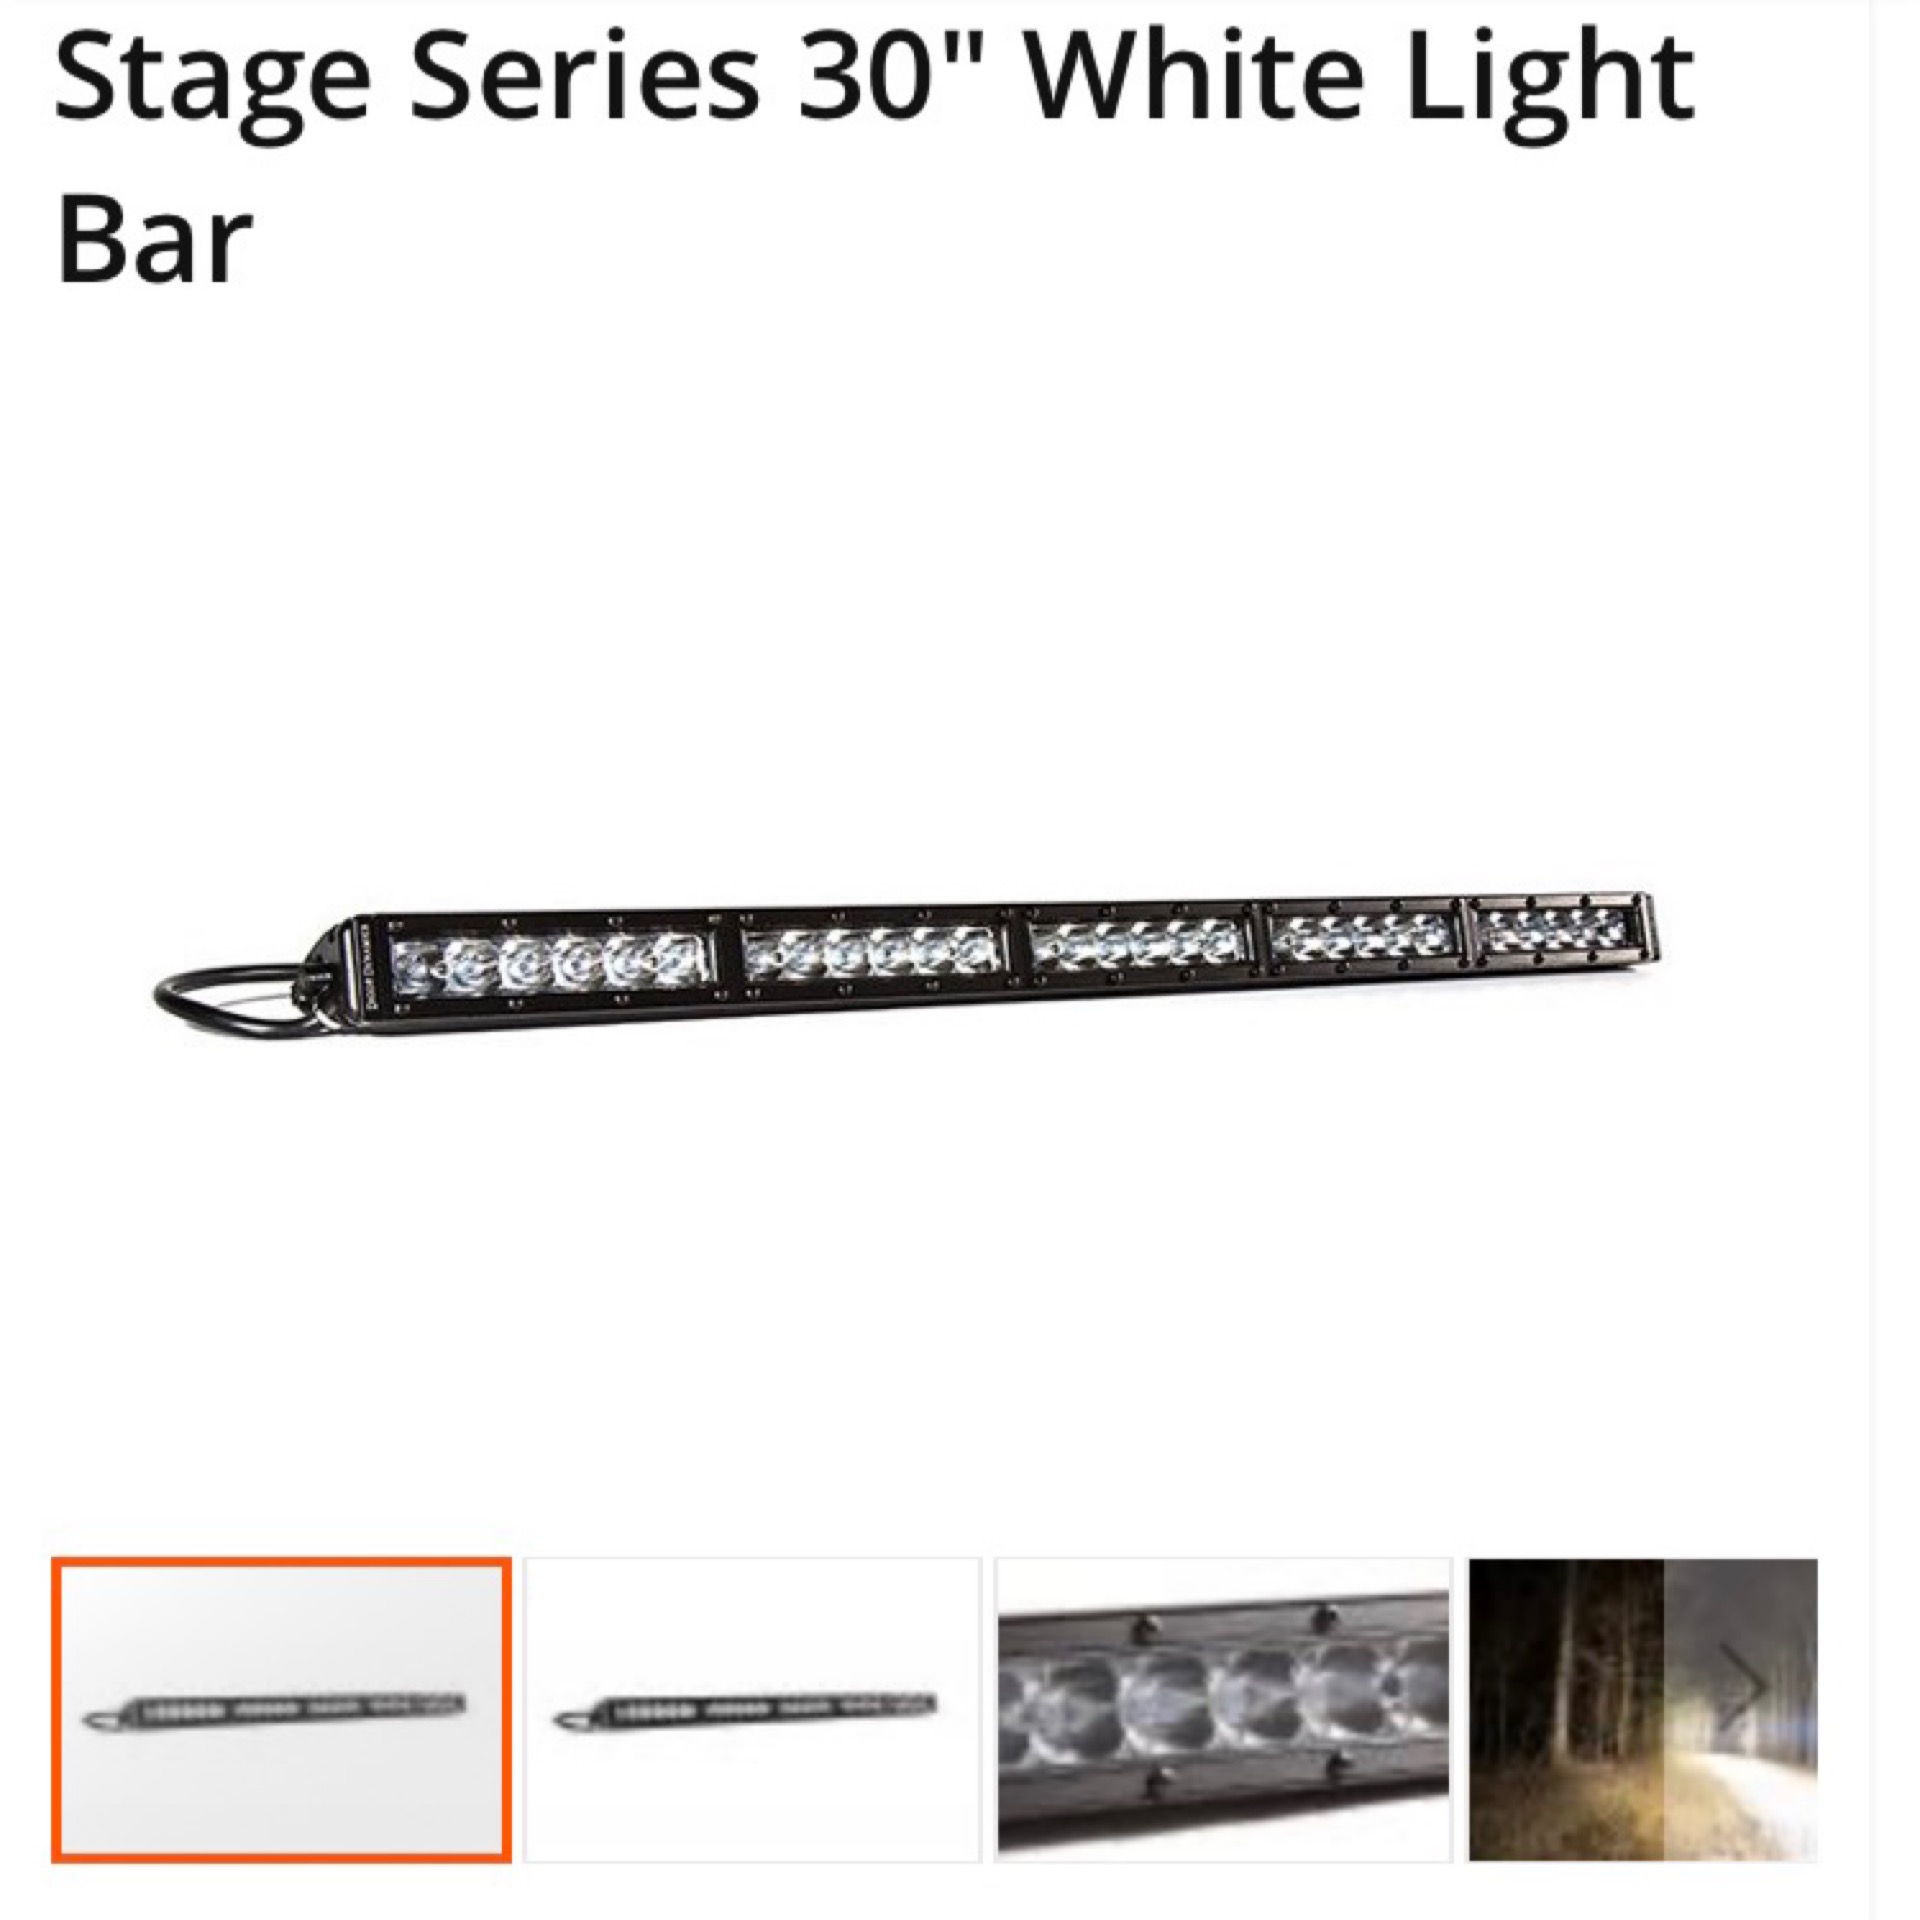 Diode Dynamics Stage Series 30” Light Bar